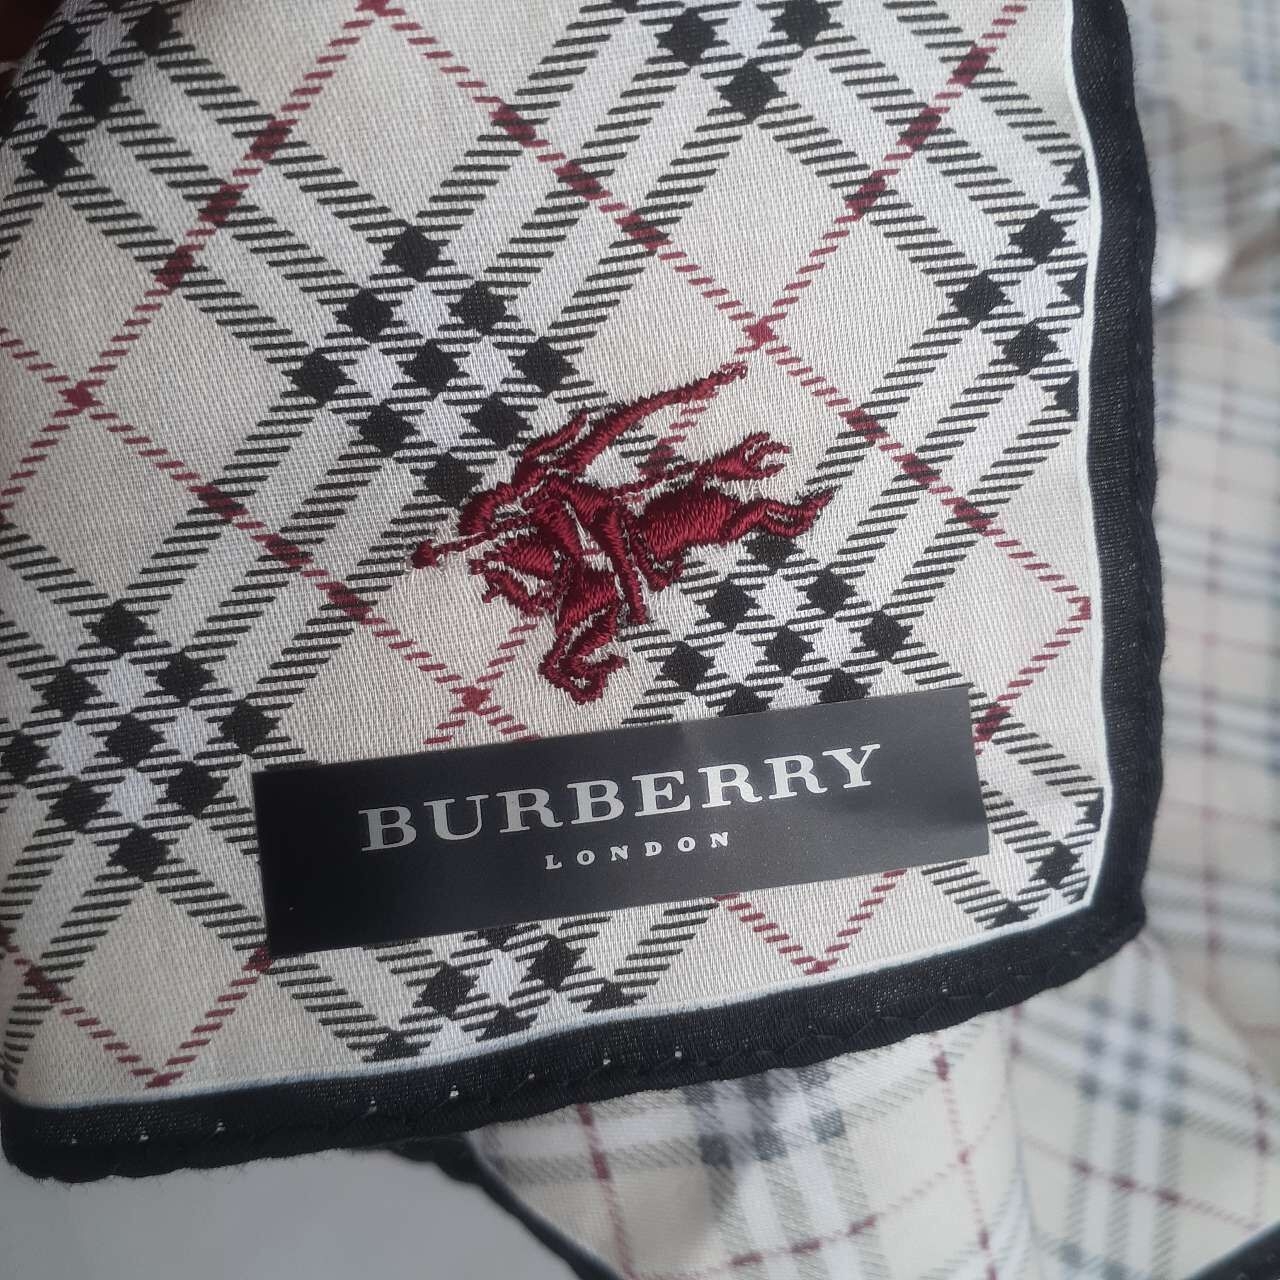 Burberry London Embroidered Logo Scarf